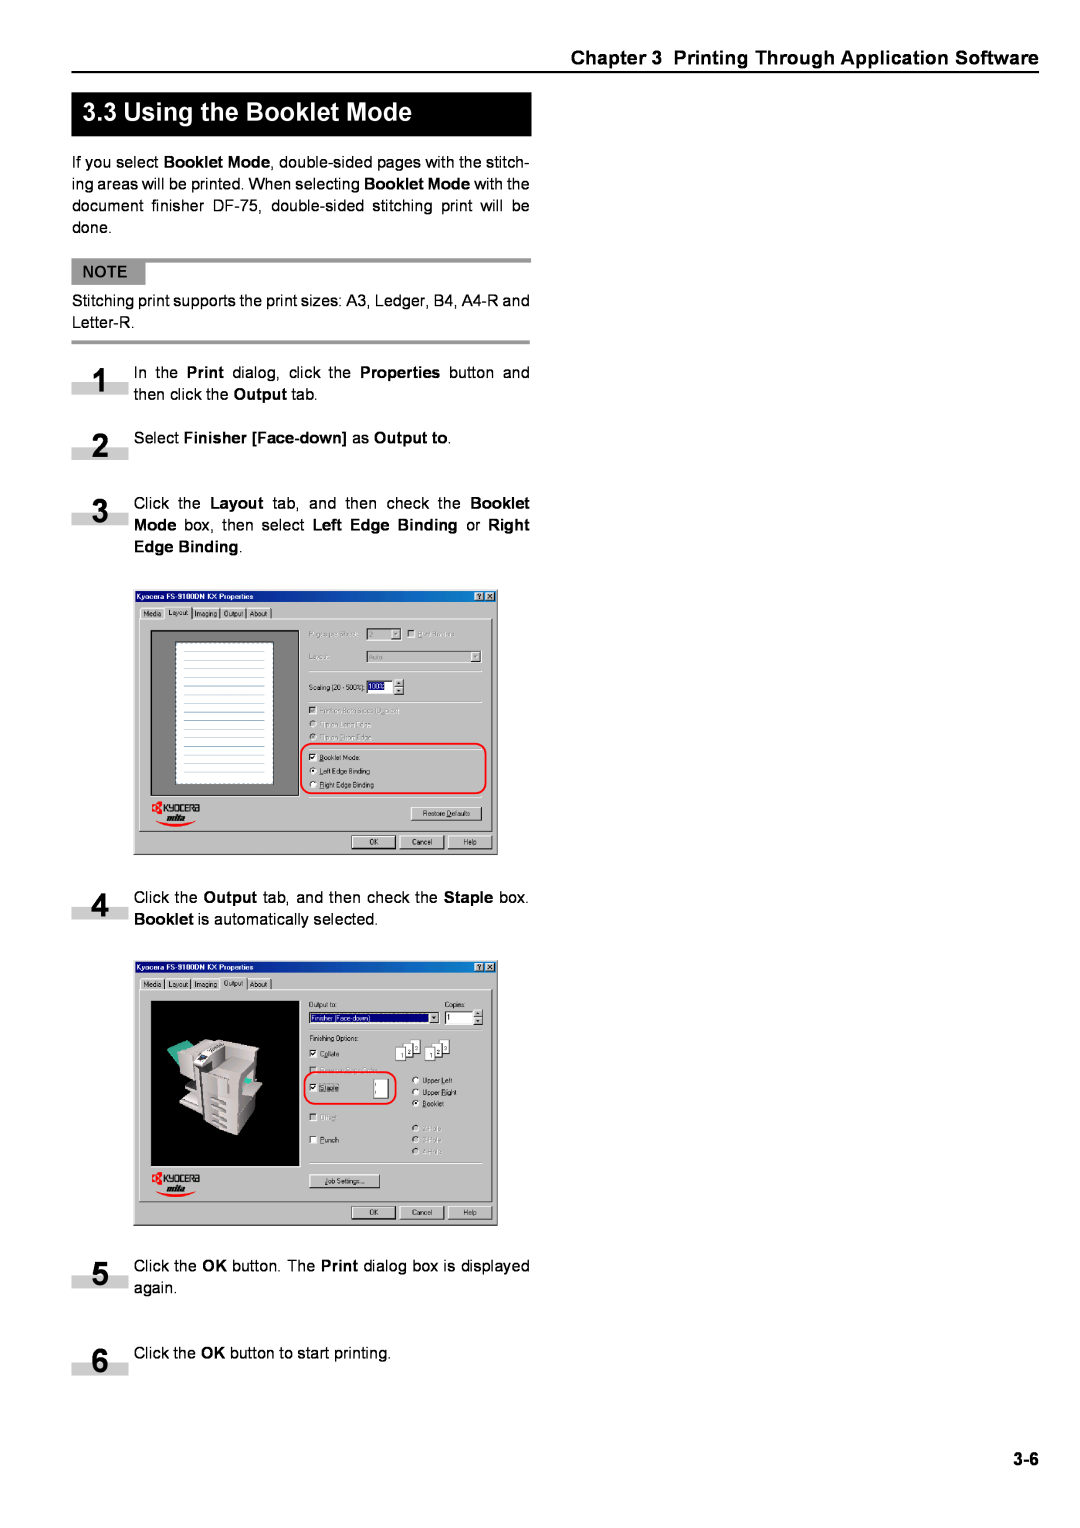 Kyocera S-9100DN manual 1 2 3, Using the Booklet Mode, Printing Through Application Software 